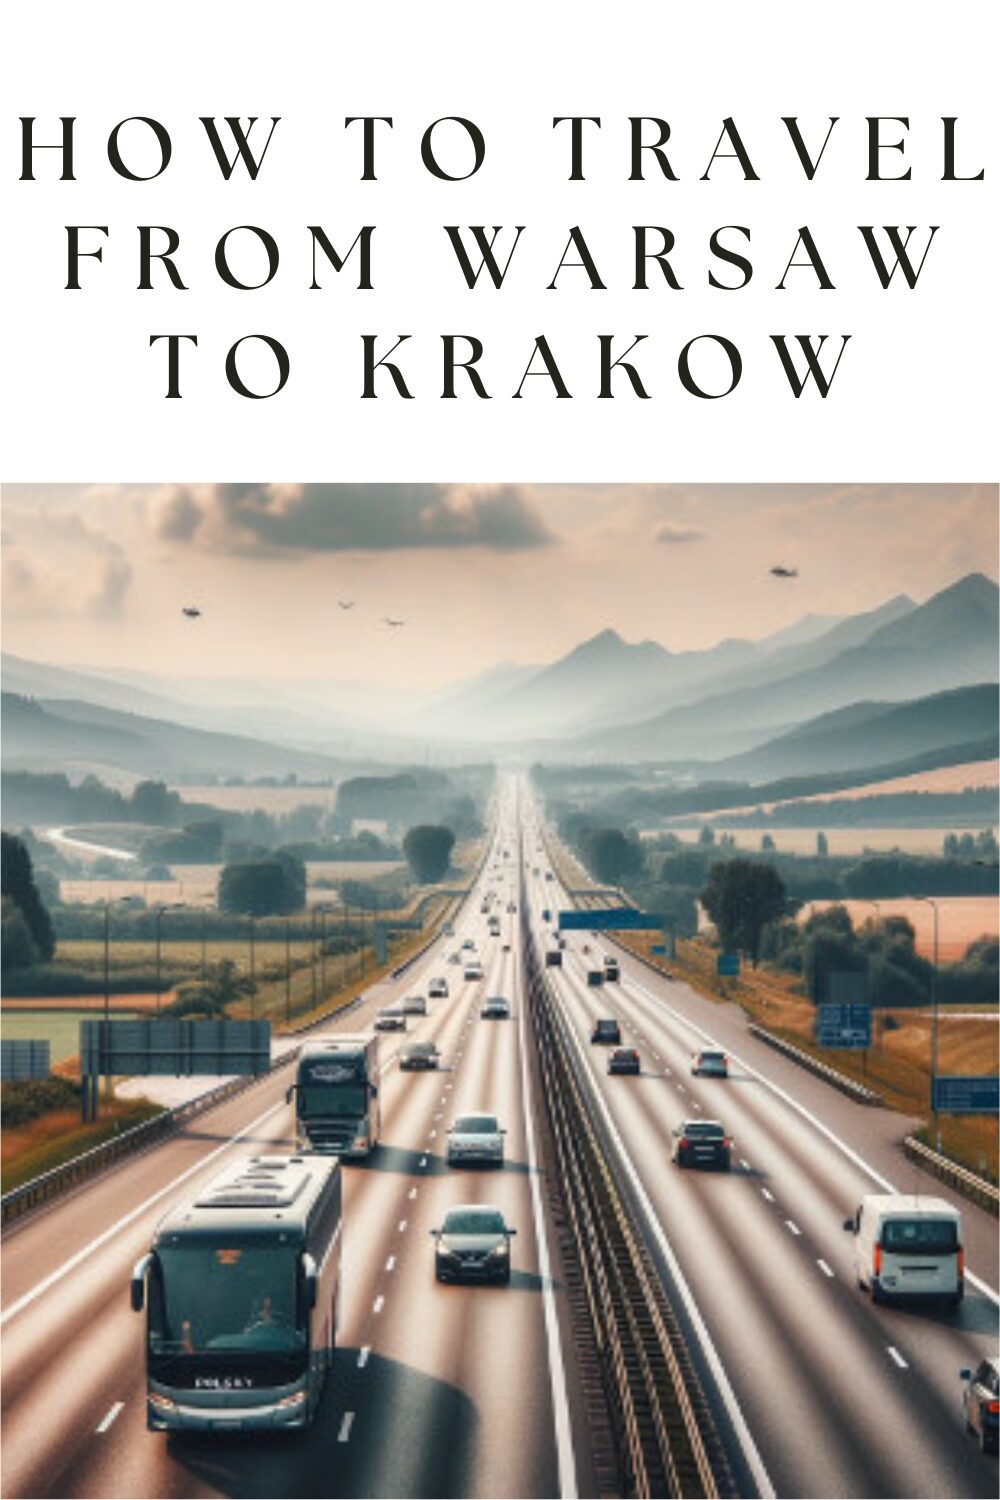 How to travel from Warsaw to Krakow guide